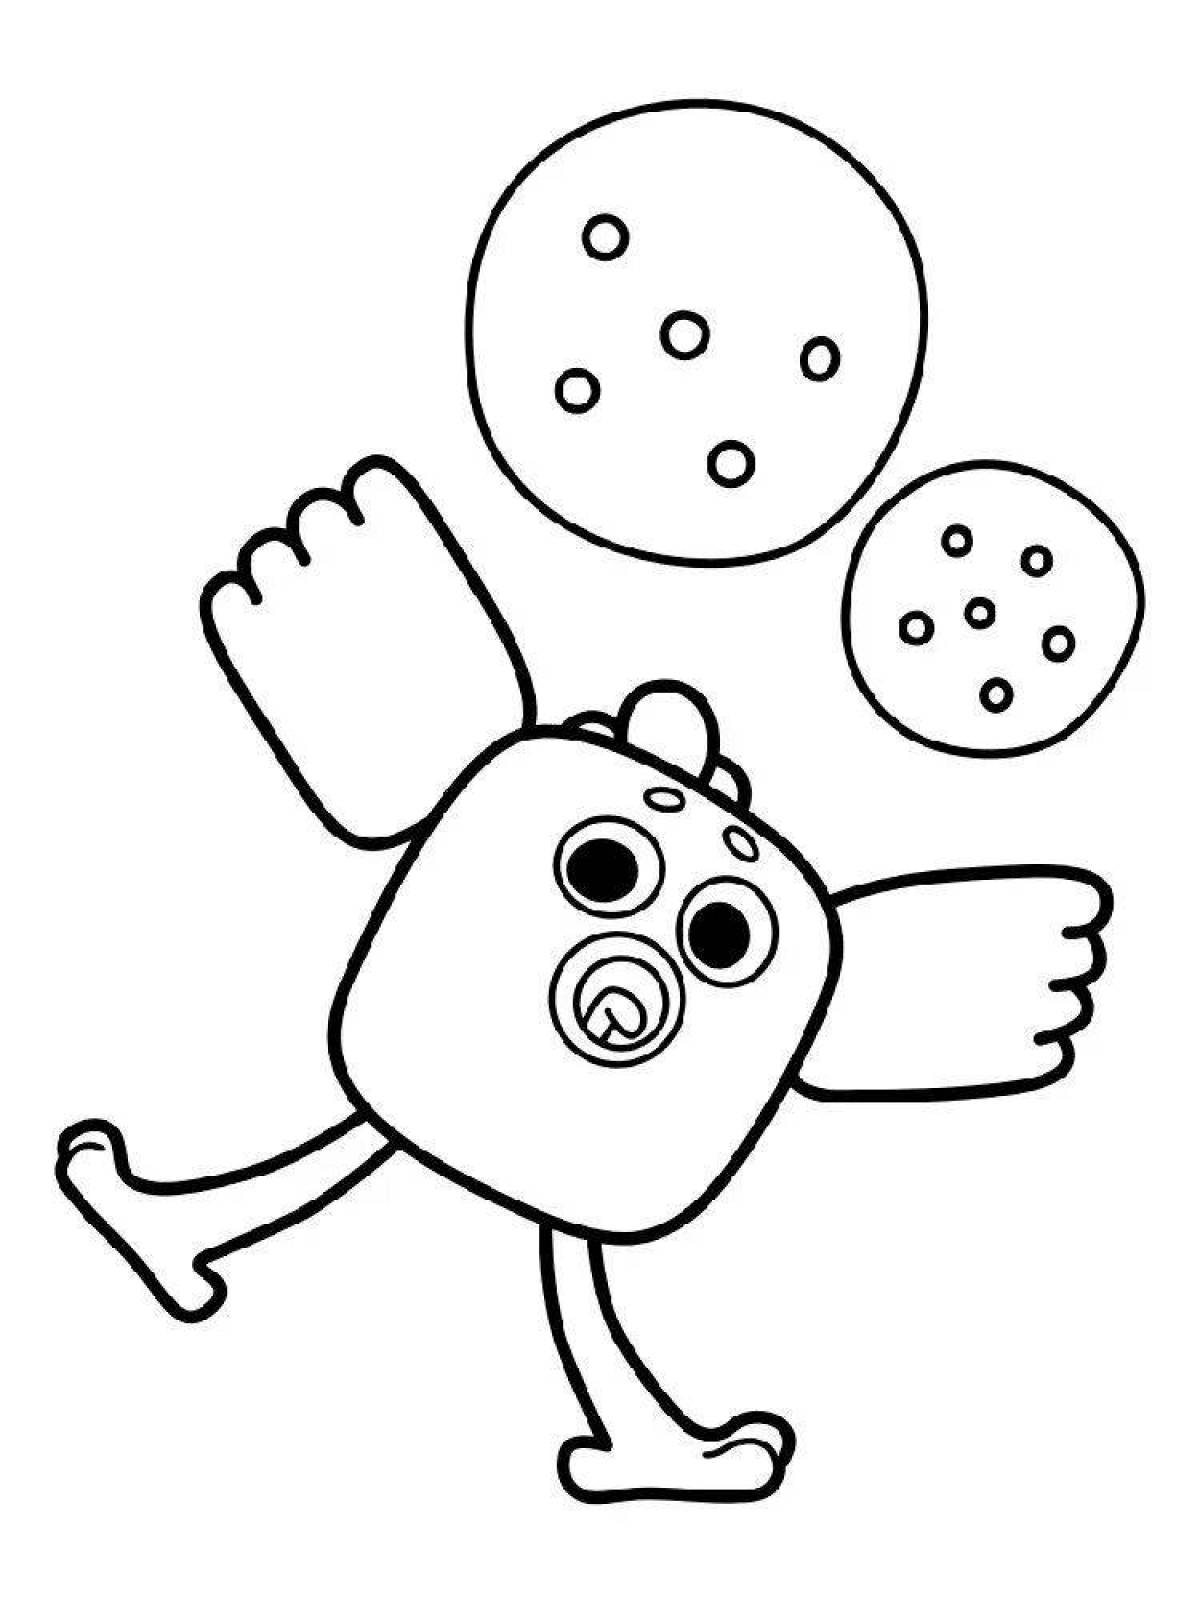 Cute and adorable cute chicken coloring page